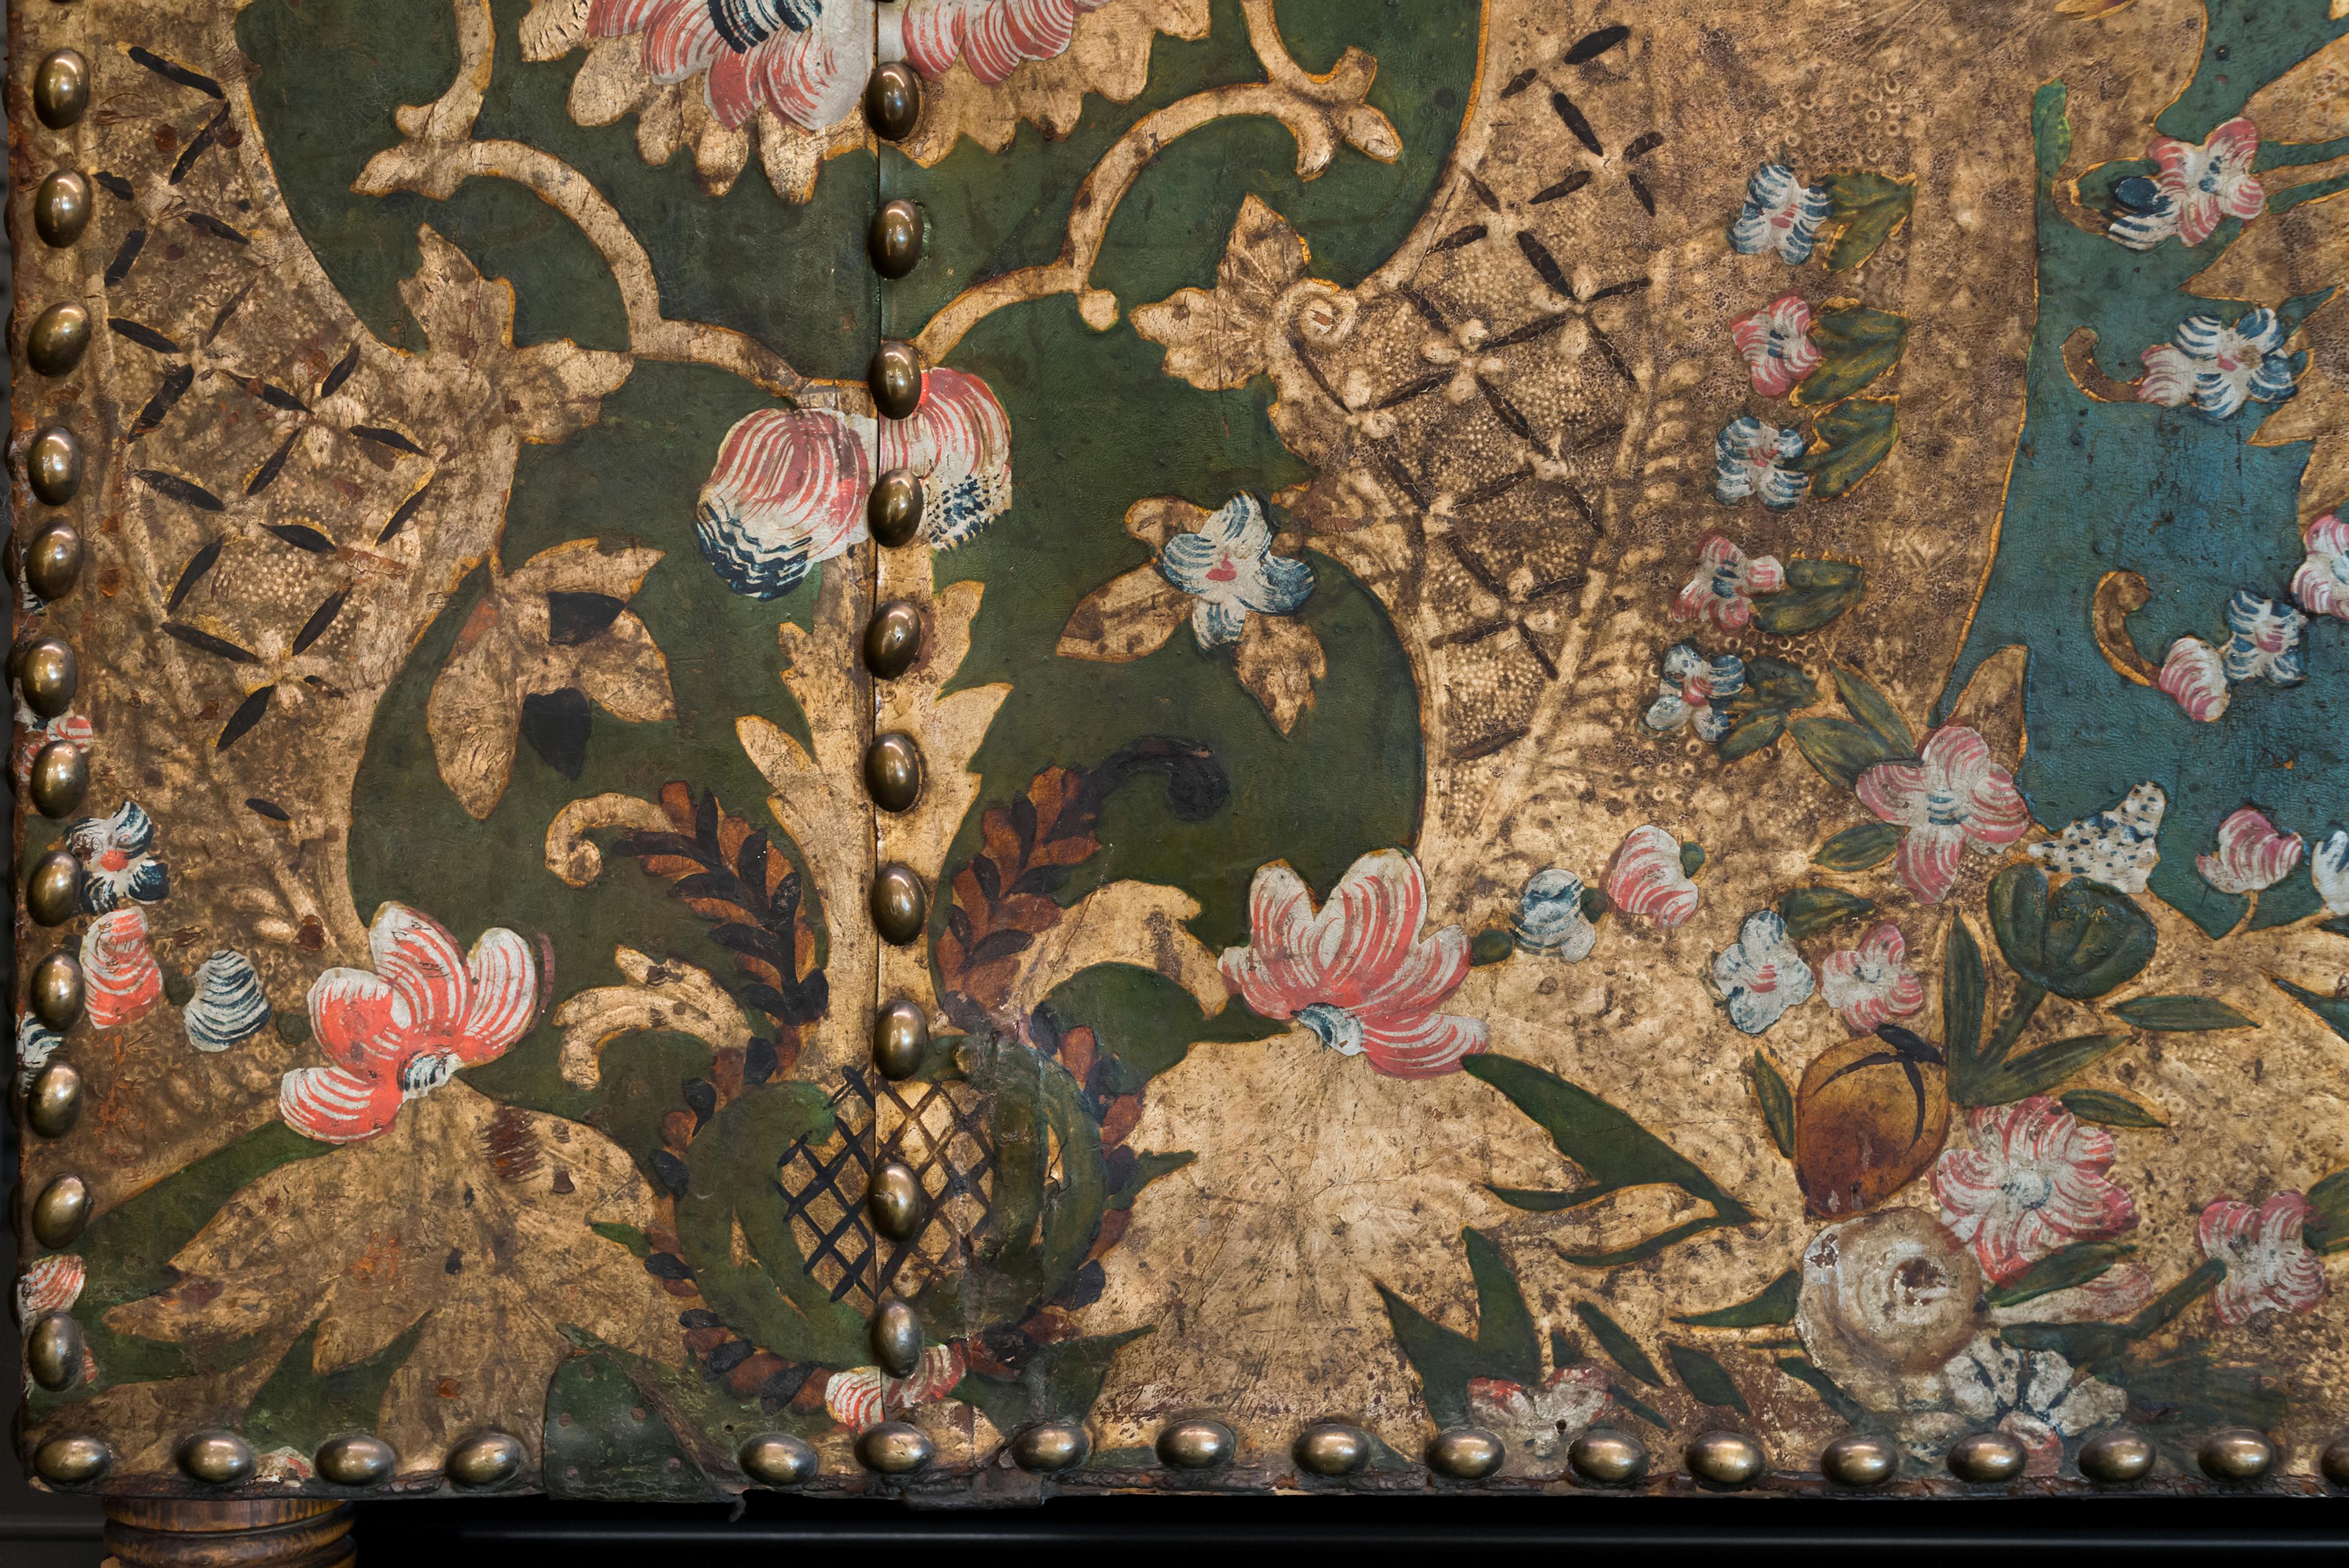 Details from an ornamented piece of wallpaper.